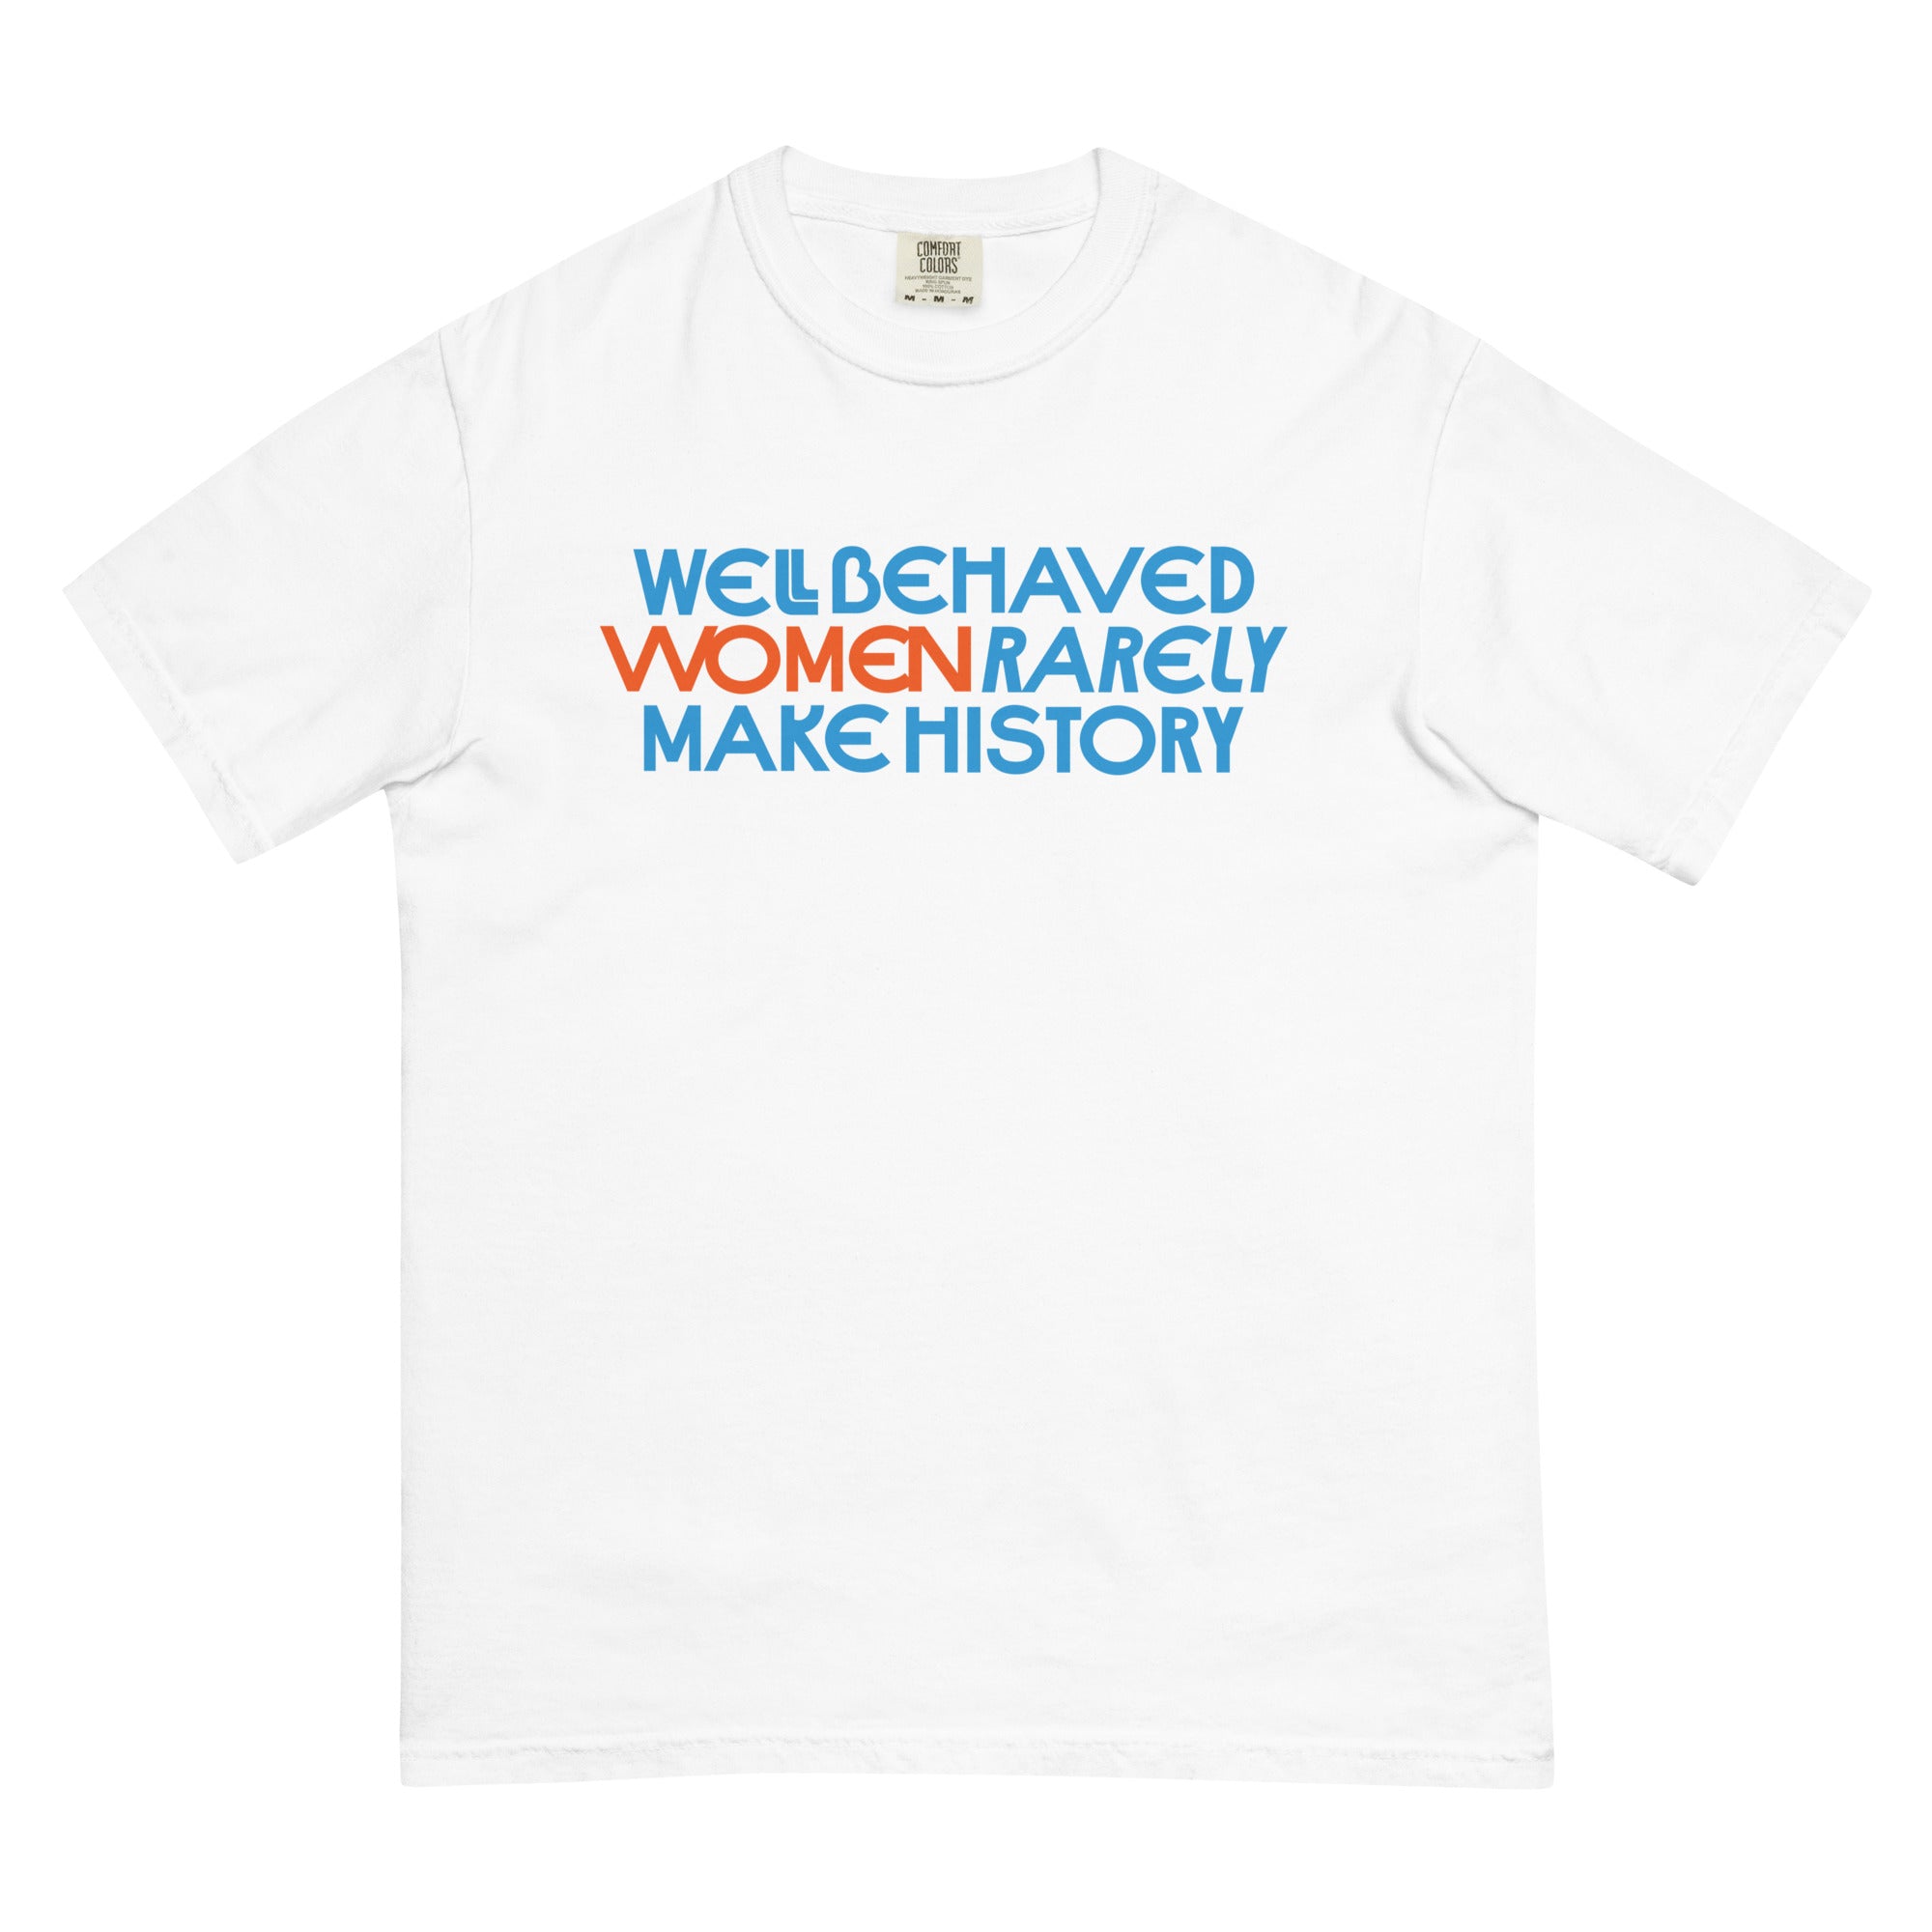 Well Behaved Women Rarely Make History Tee